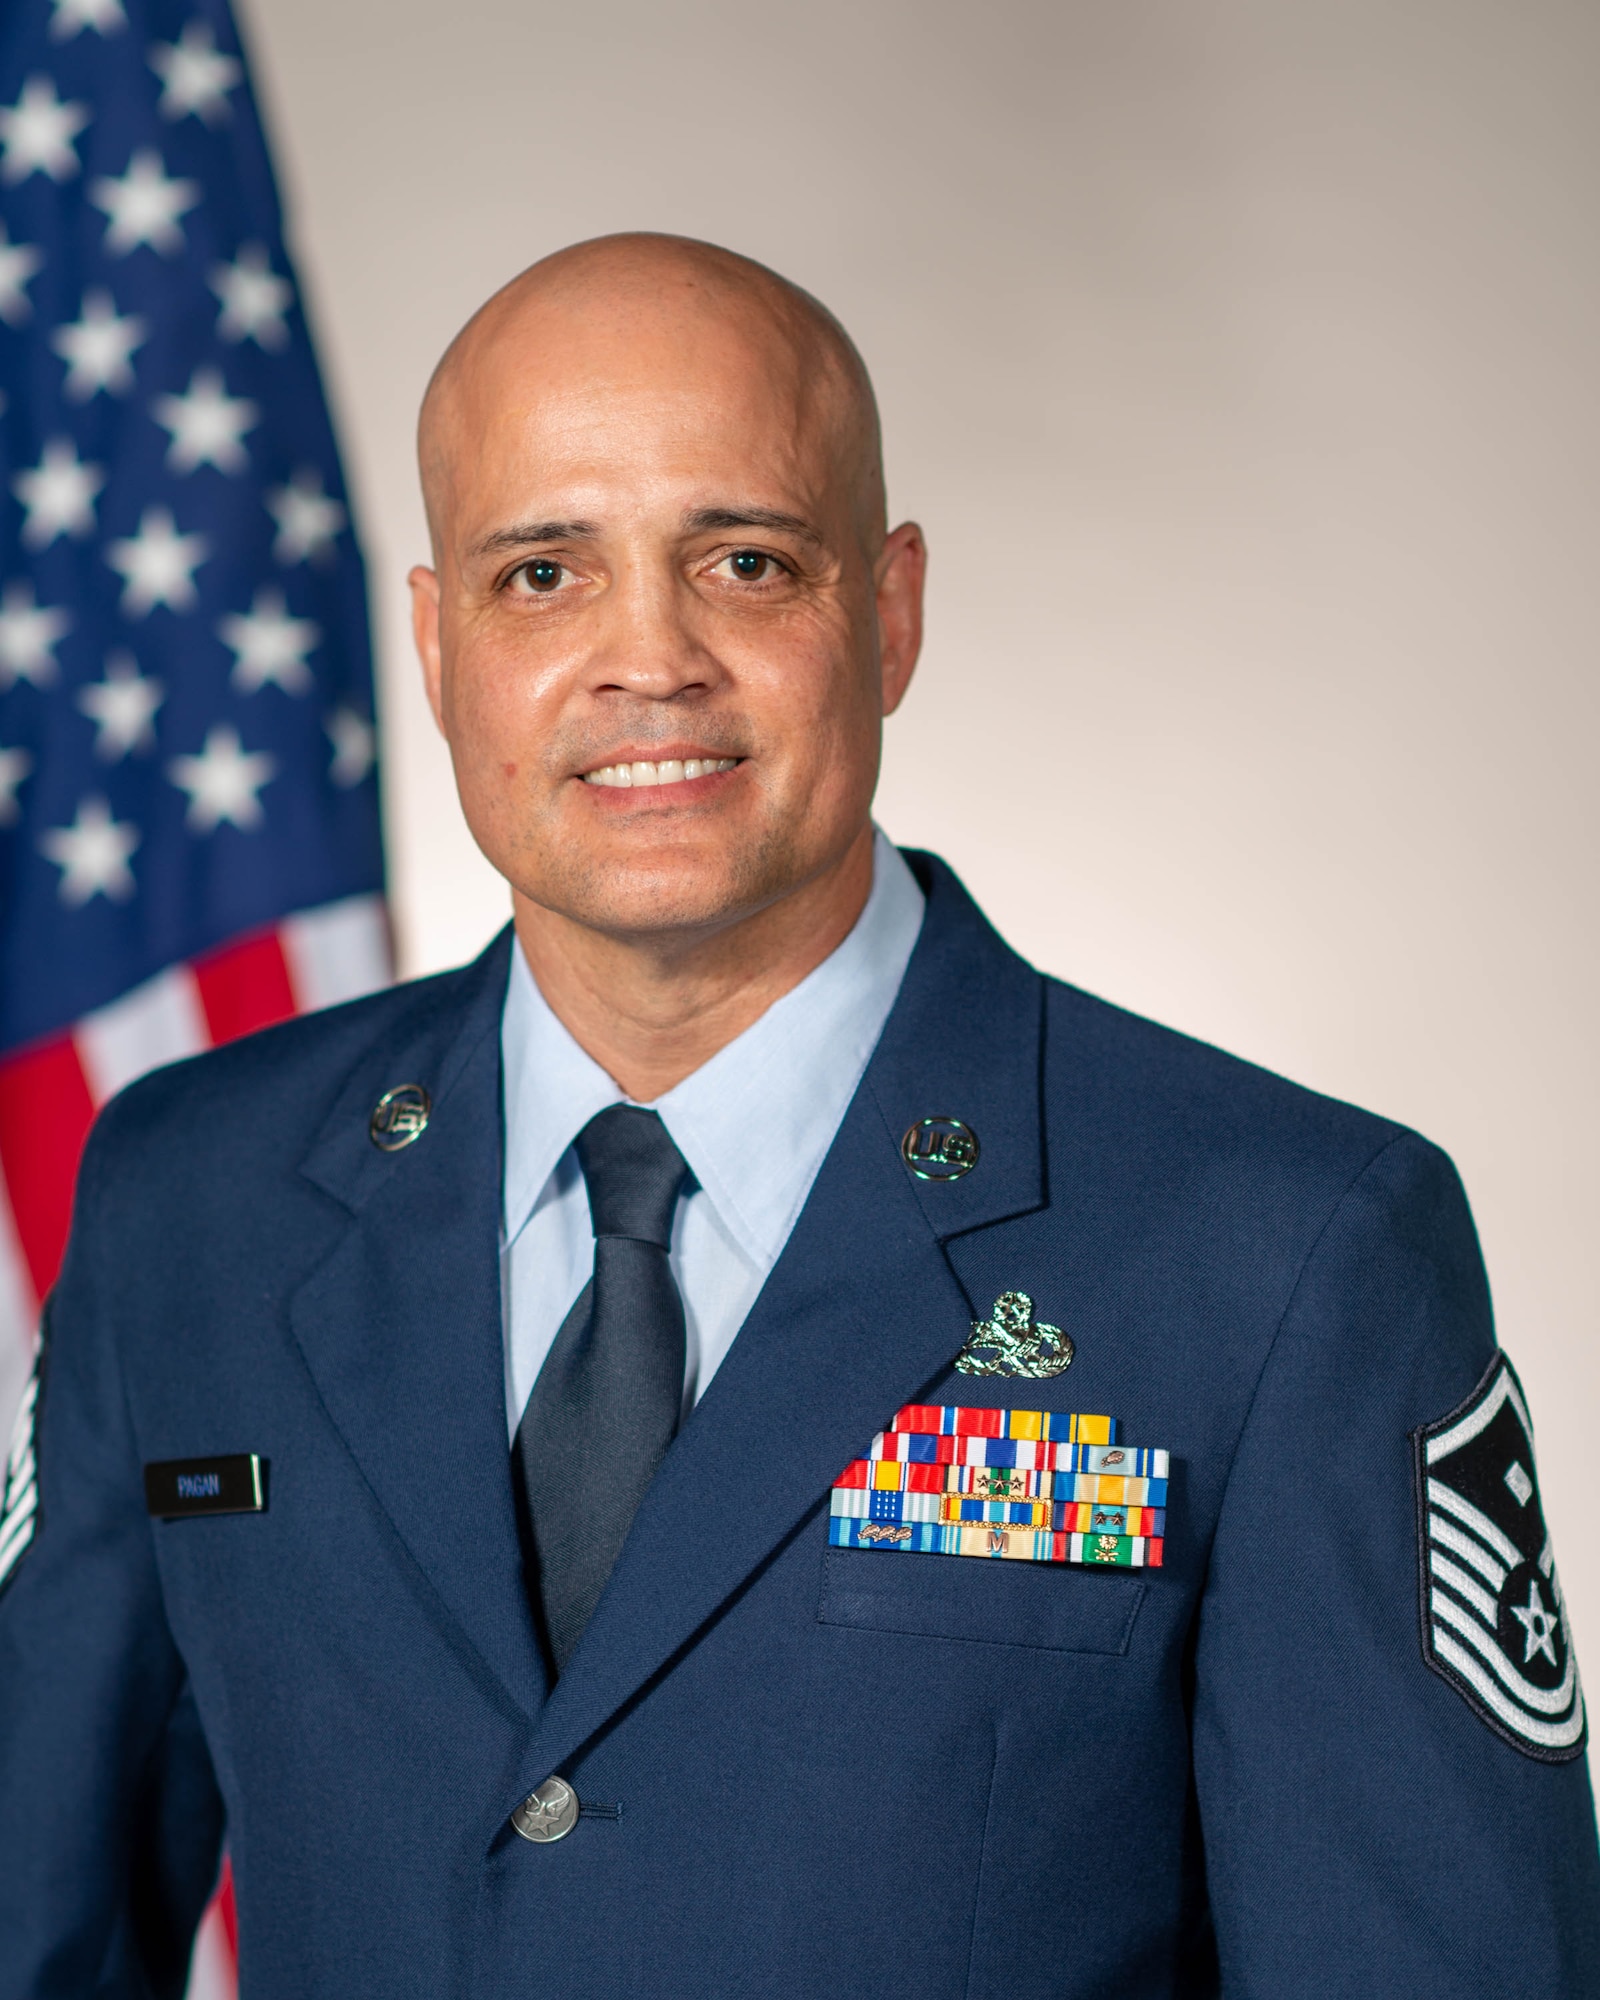 Official photo of Master Sgt. Jose R. Pagan, Jr., the Air Force Reserve Command Outstanding First Sgt. of the Year award winner for 2021.